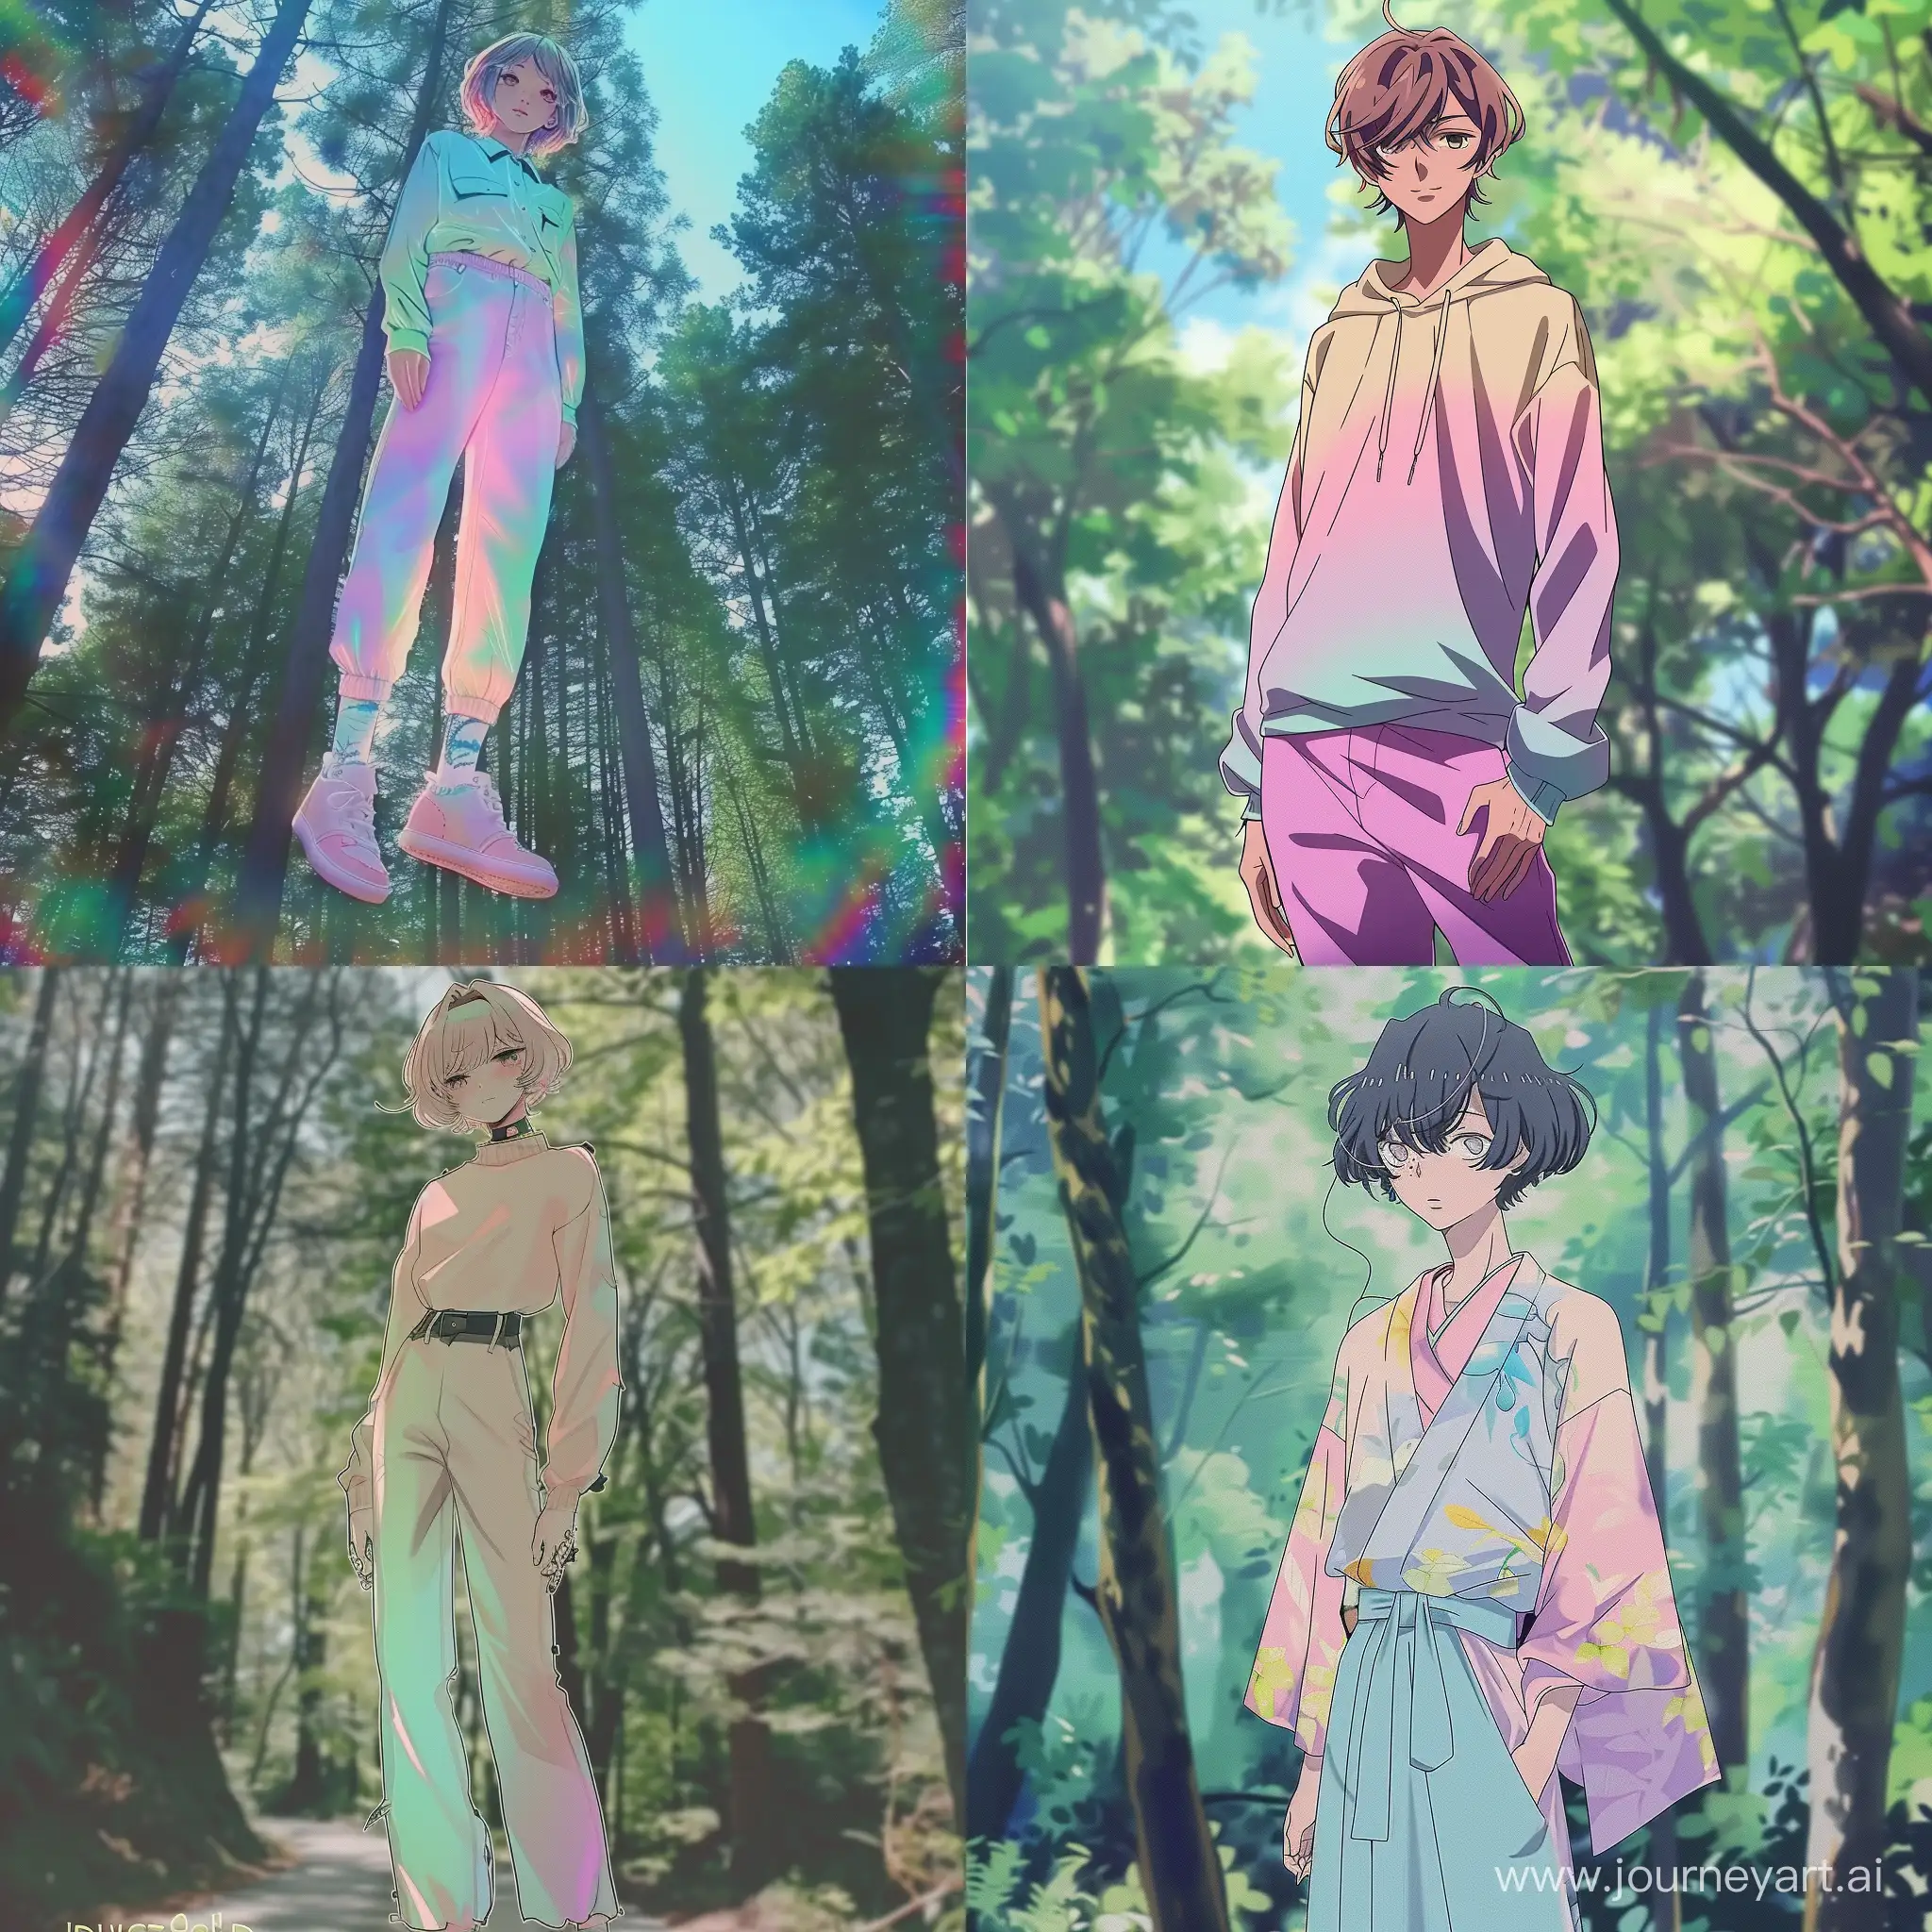 A tall person who i cant tell the gender of. Anime style, cute haircut, pastel colored clothing, forest